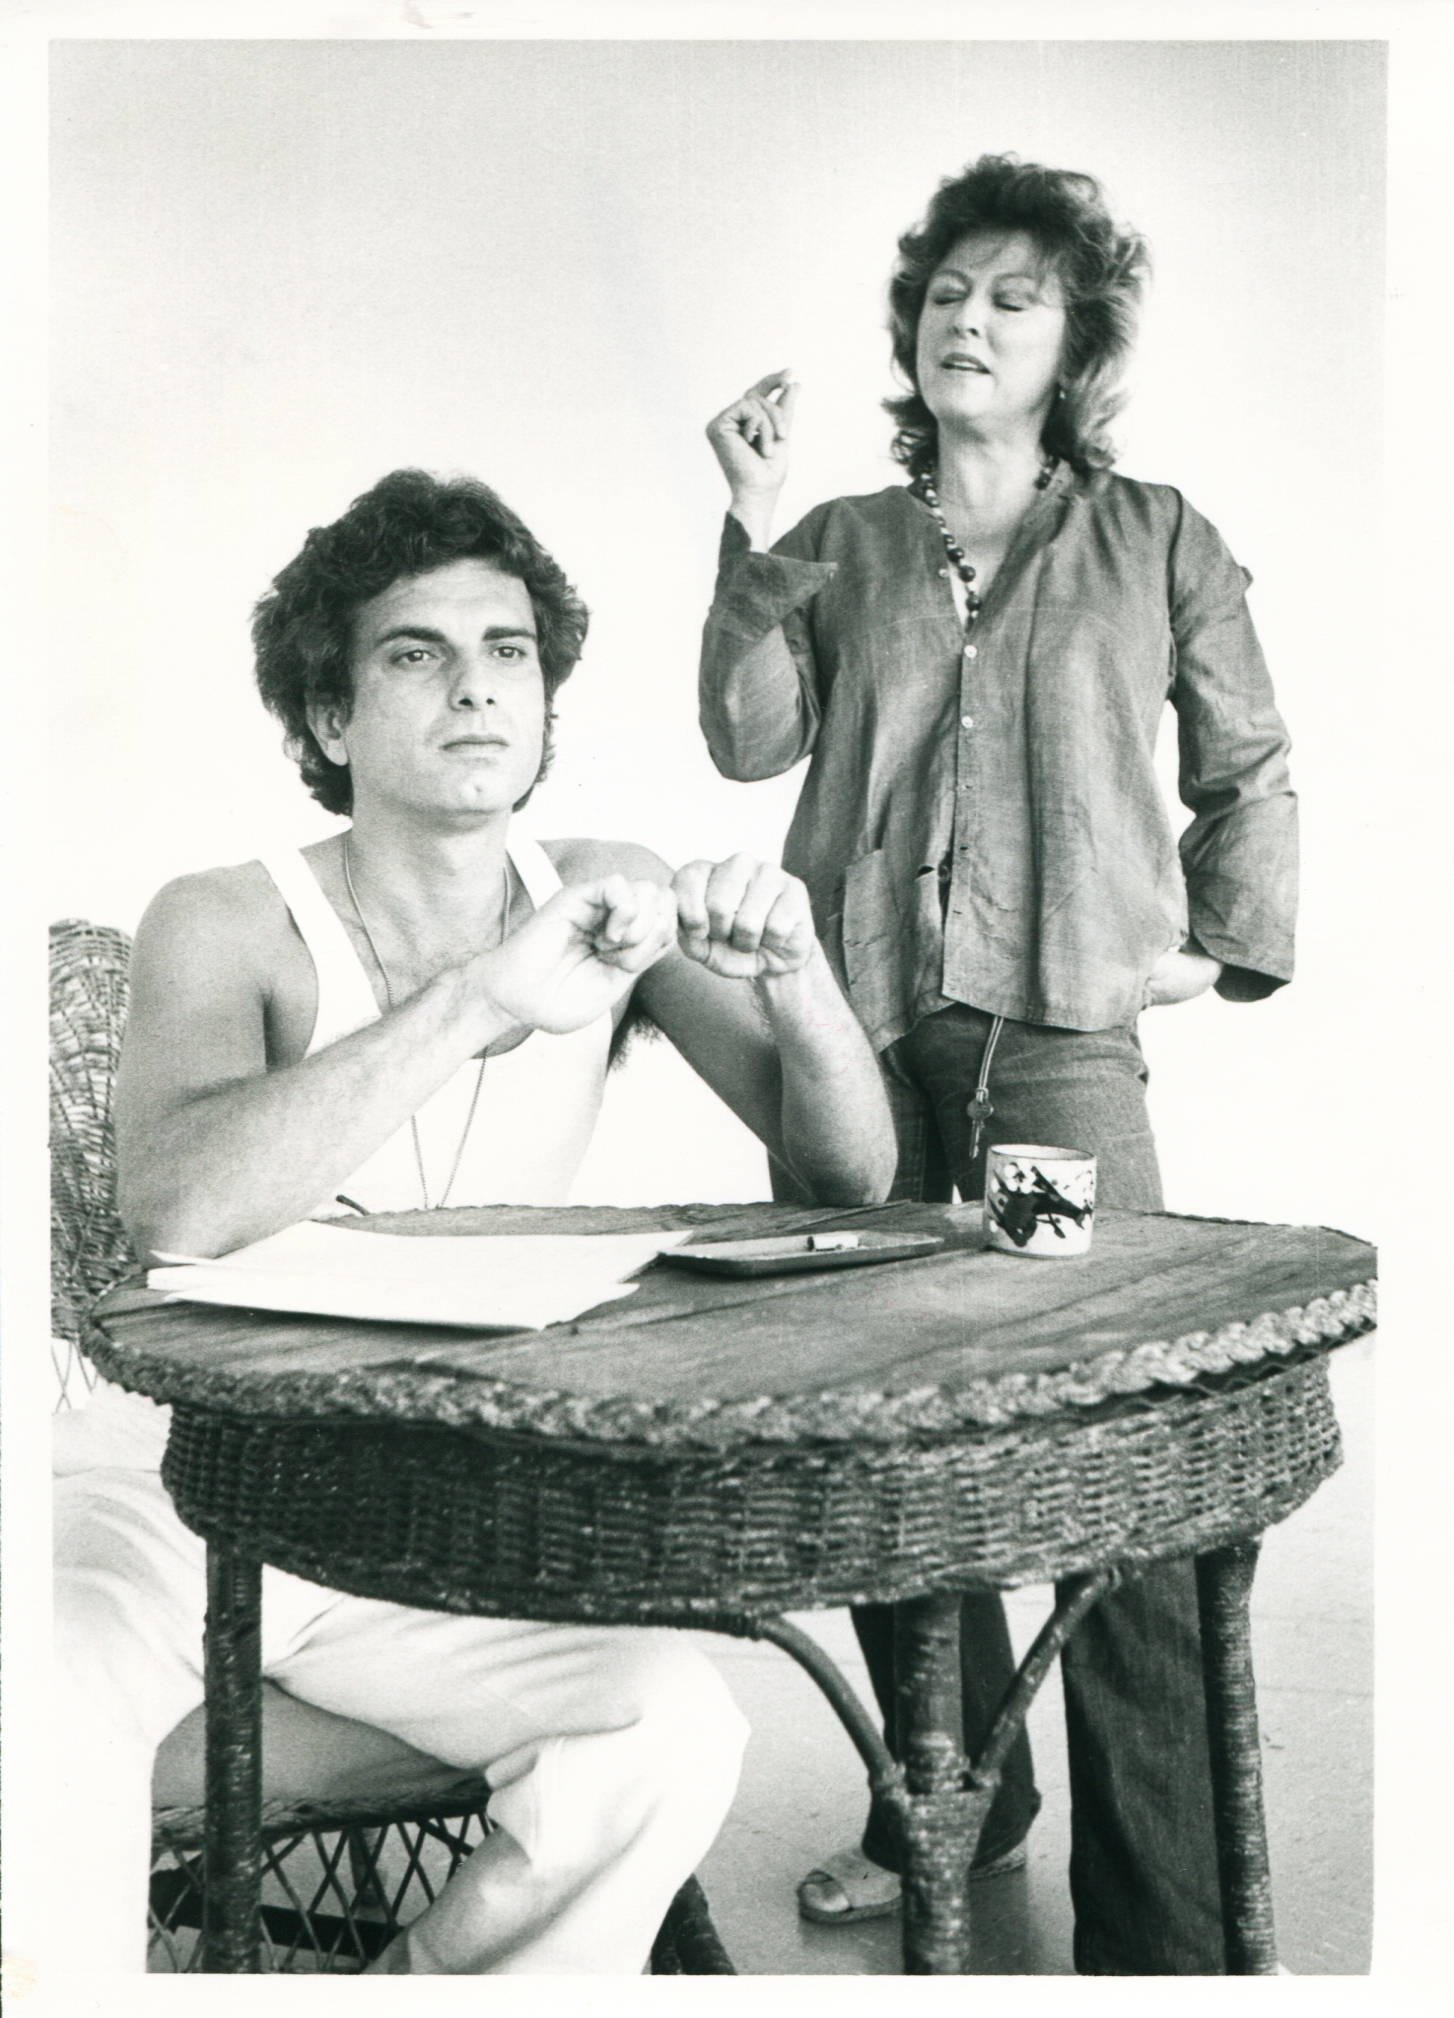 Steven Mastroieni and Carolyn Paine in Tennessee Williams' "The Night of the Iguana," at Phoenix Little Theatre. (Photo courtesy of Steven Mastroieni)